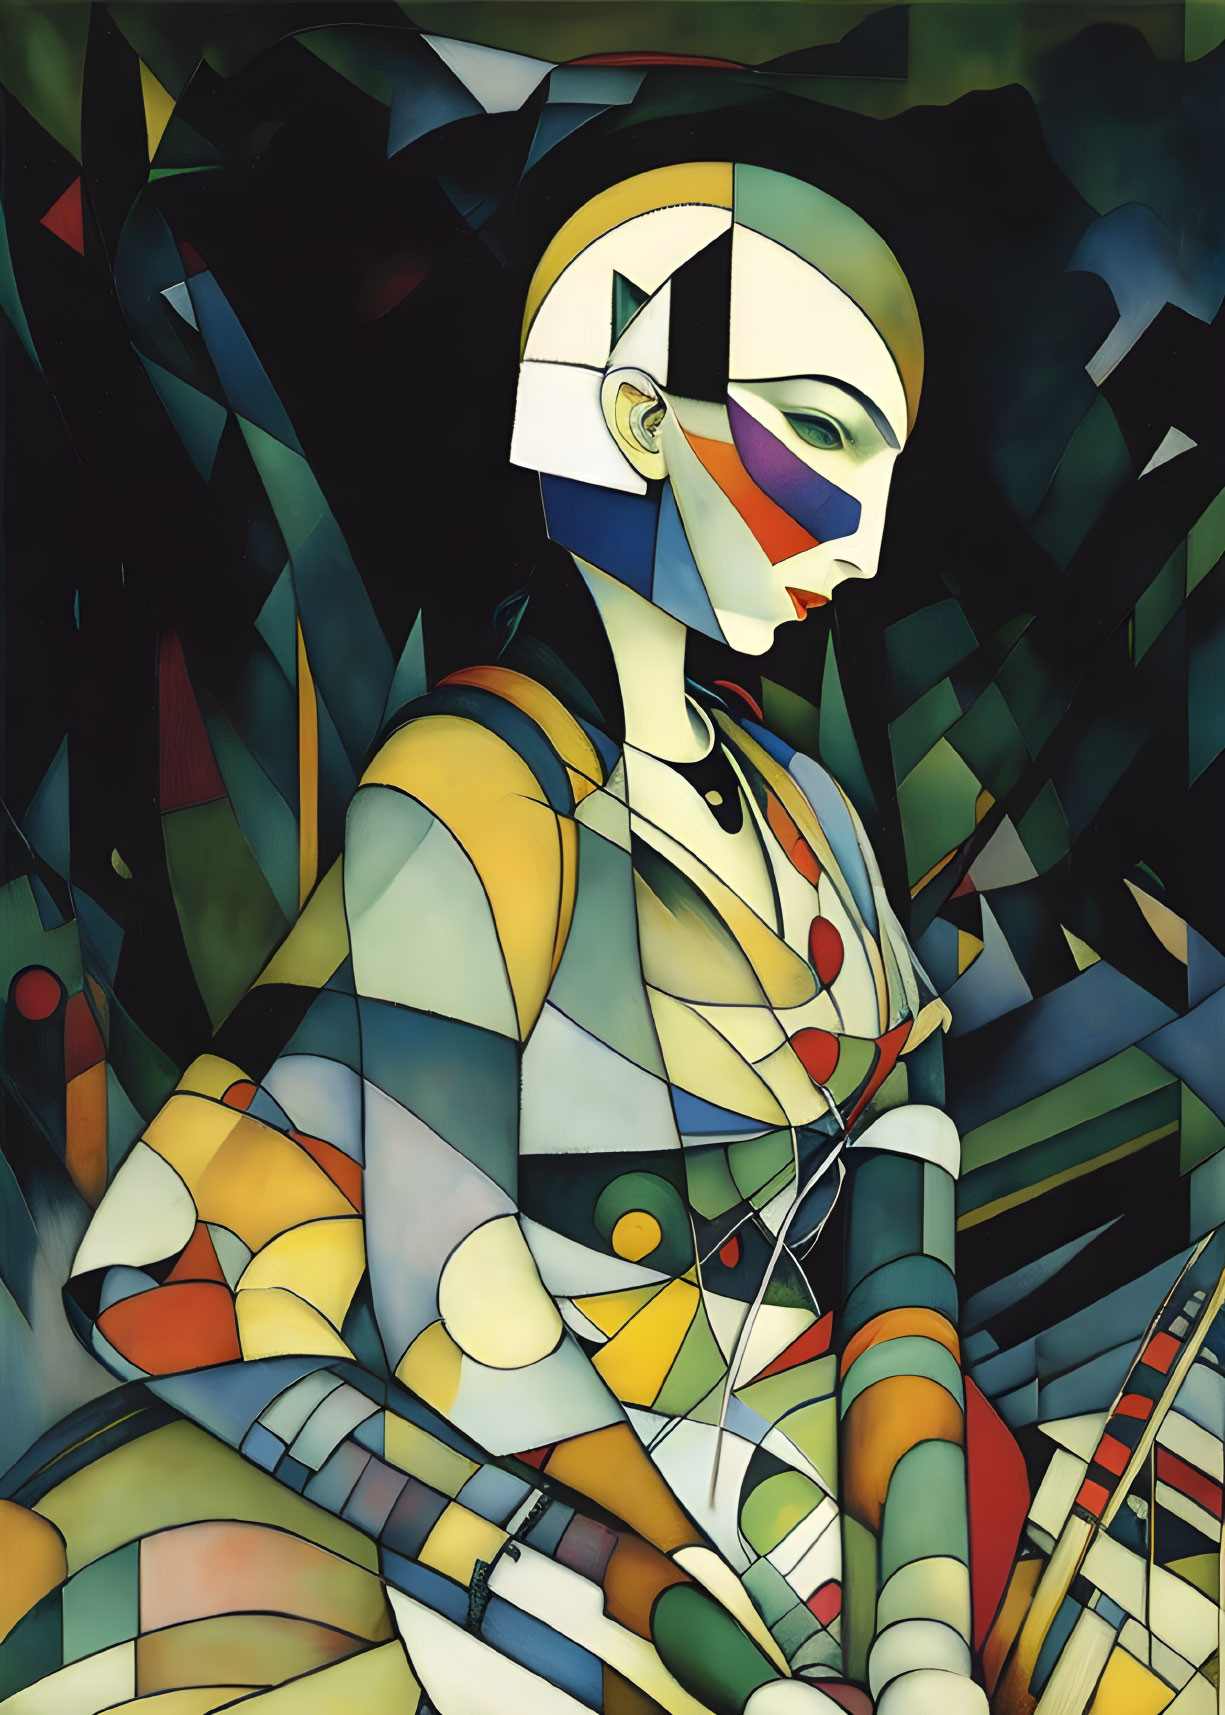 Abstract Cubist Humanoid Figure Painting with Geometric Patterns